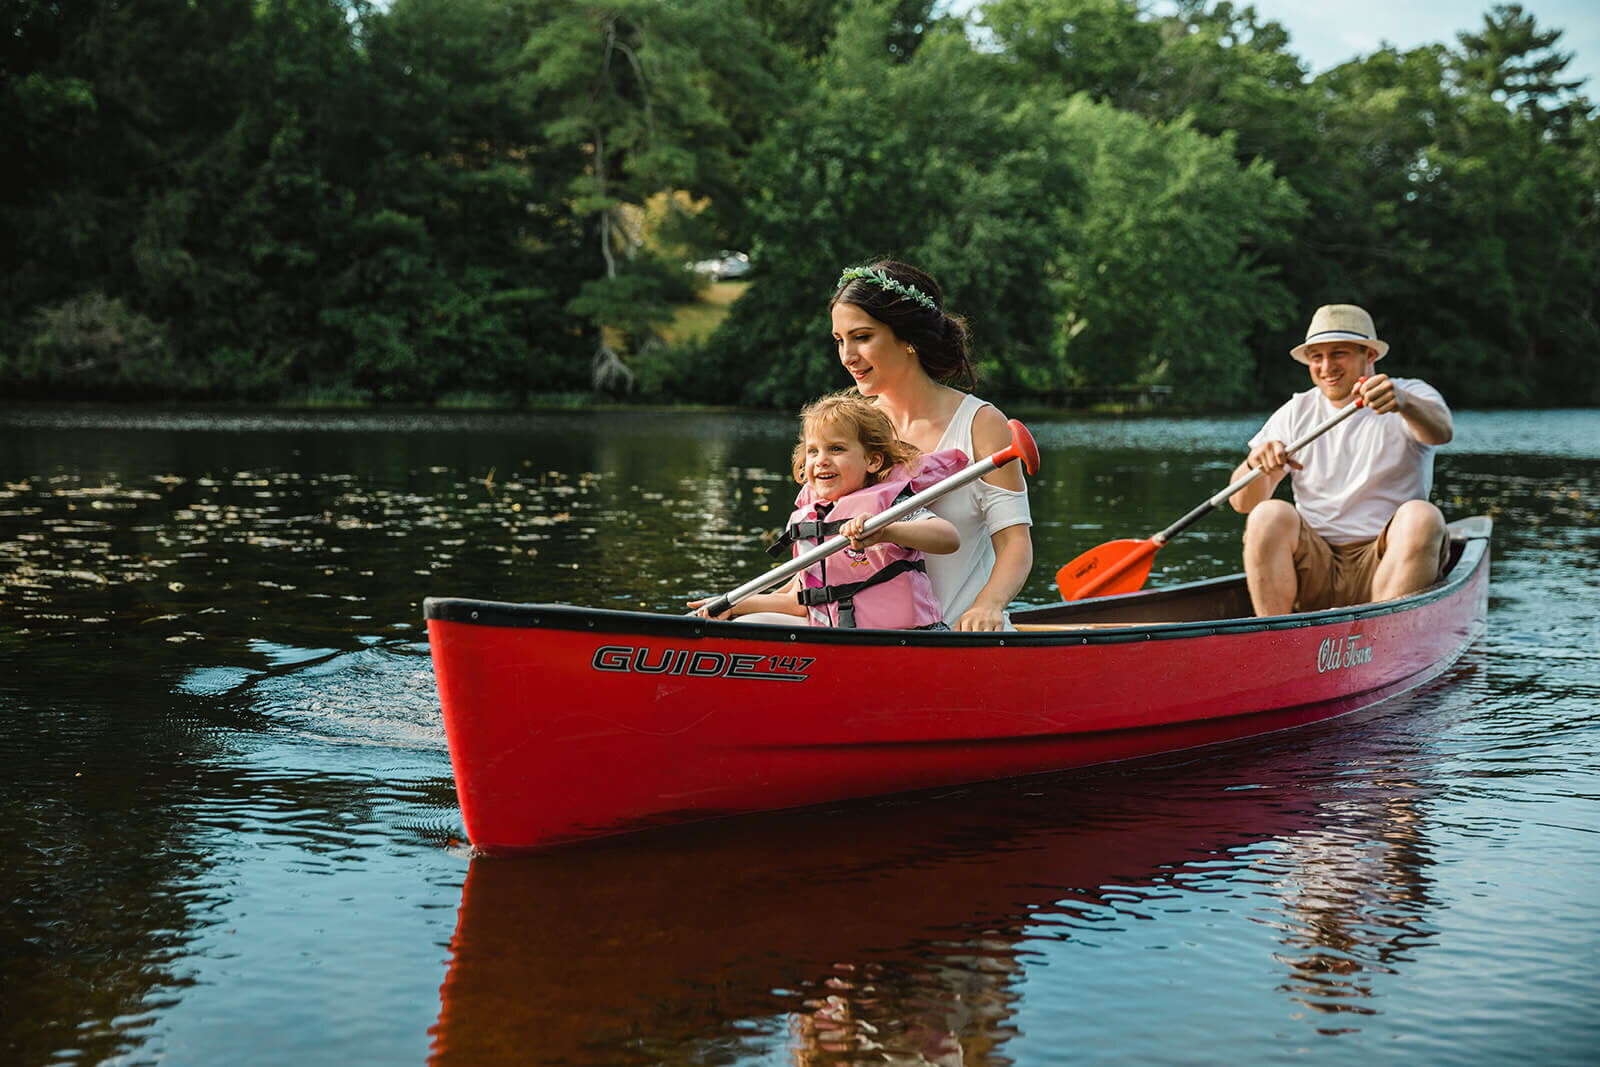  Elope with kids. Canoeing Rhode Island Elopement on the Wood River 